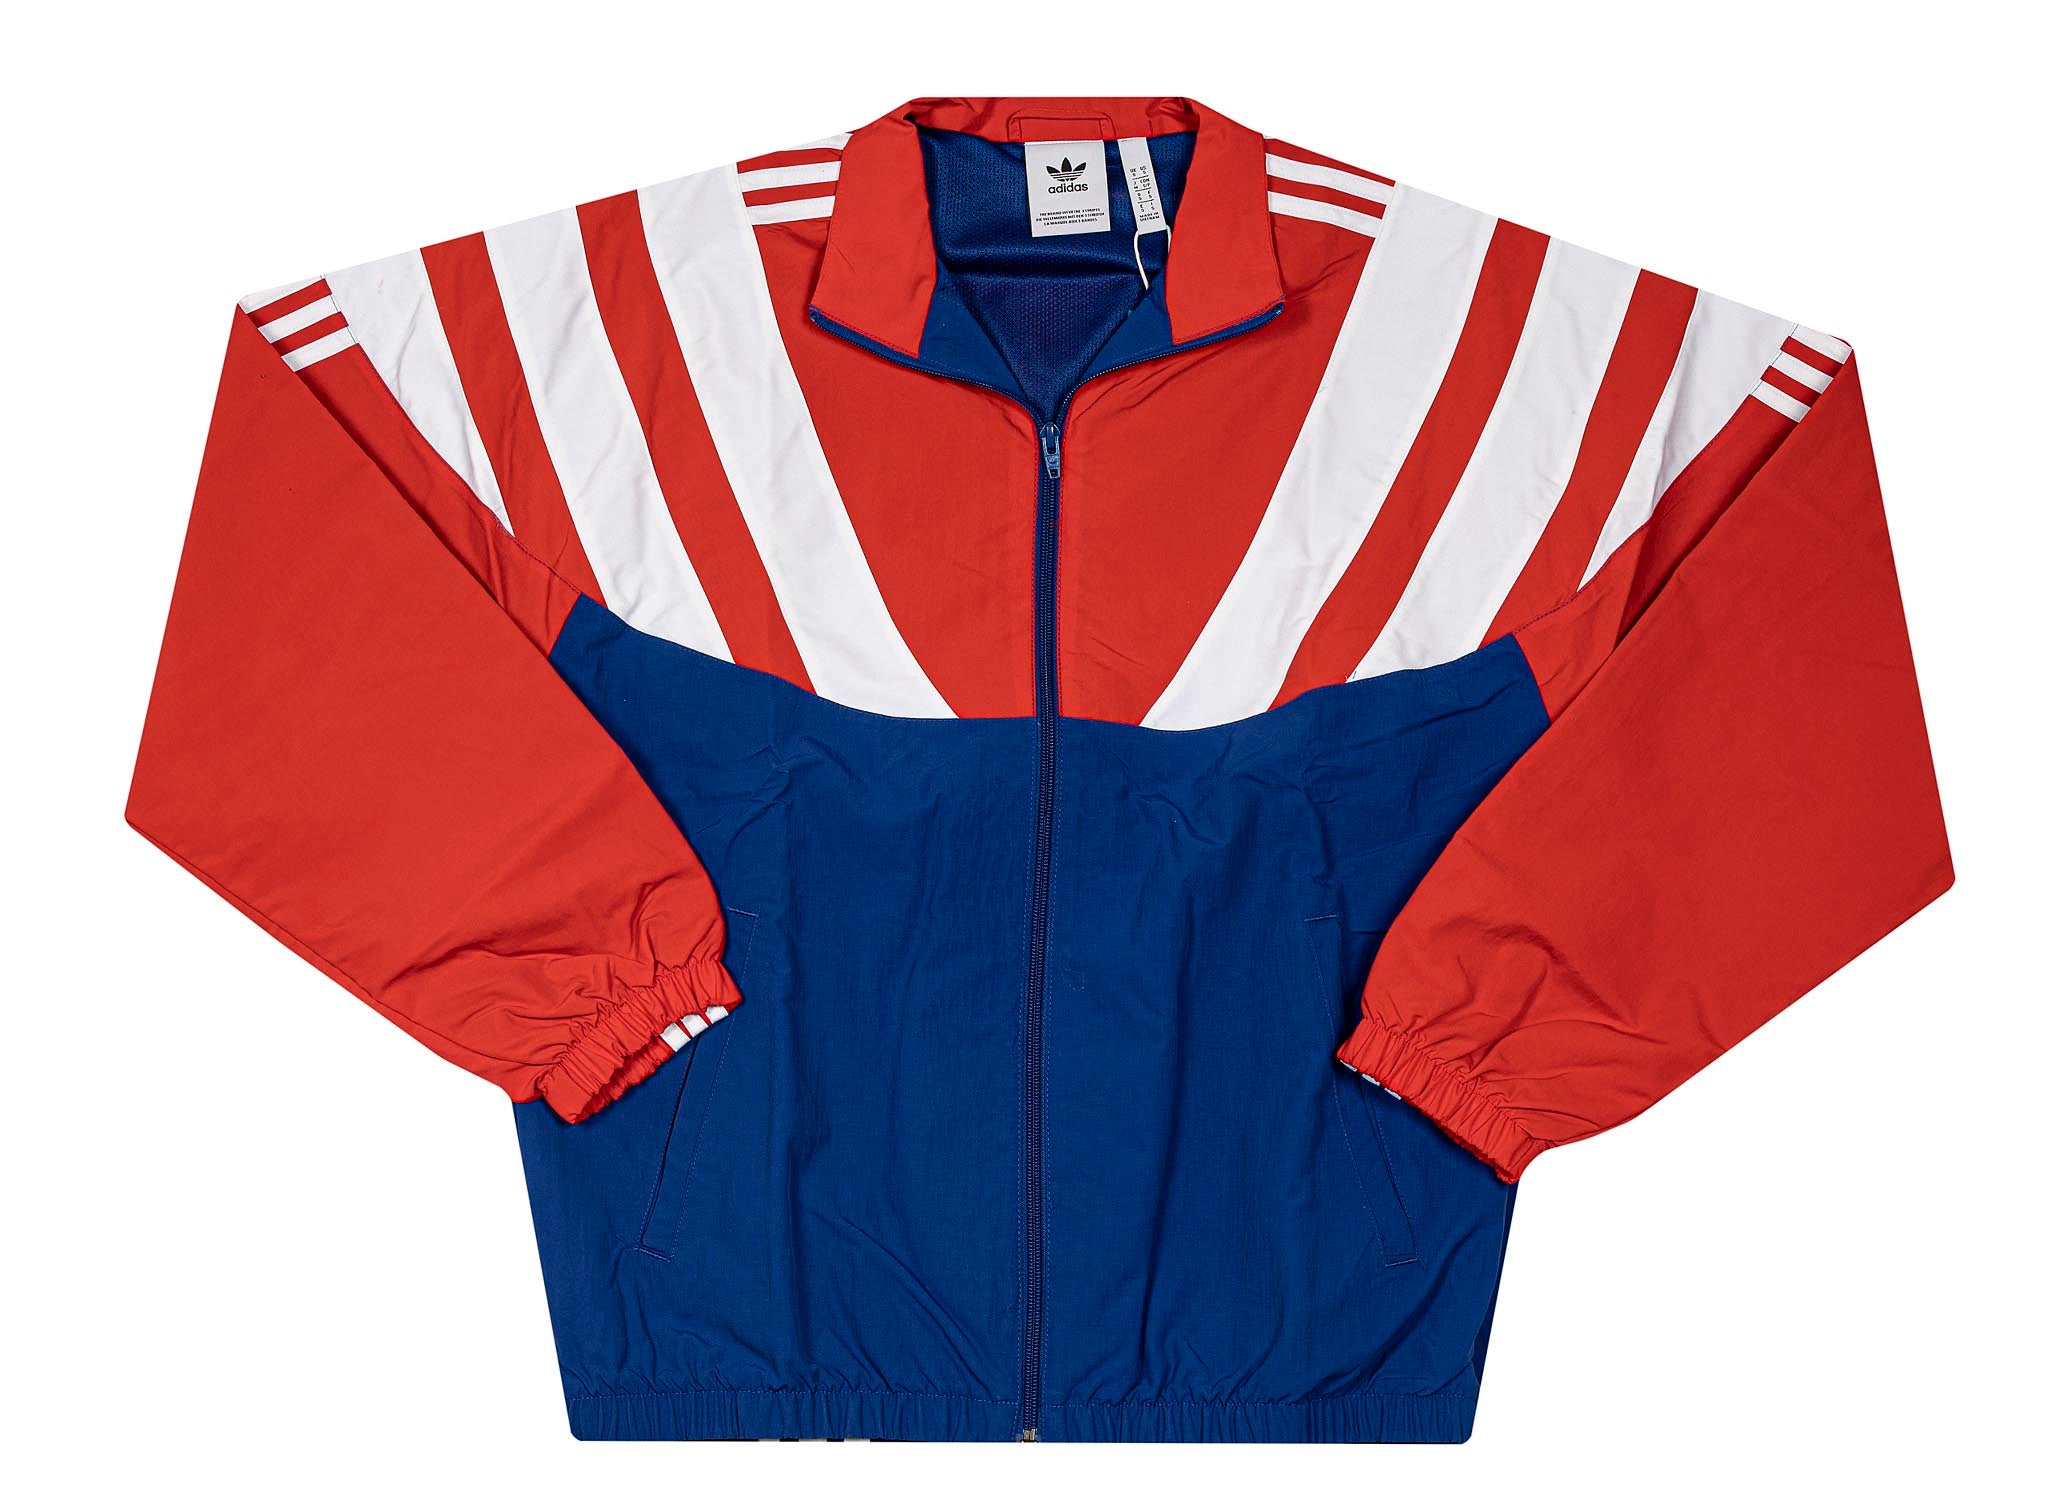 red white and blue adidas track jacket